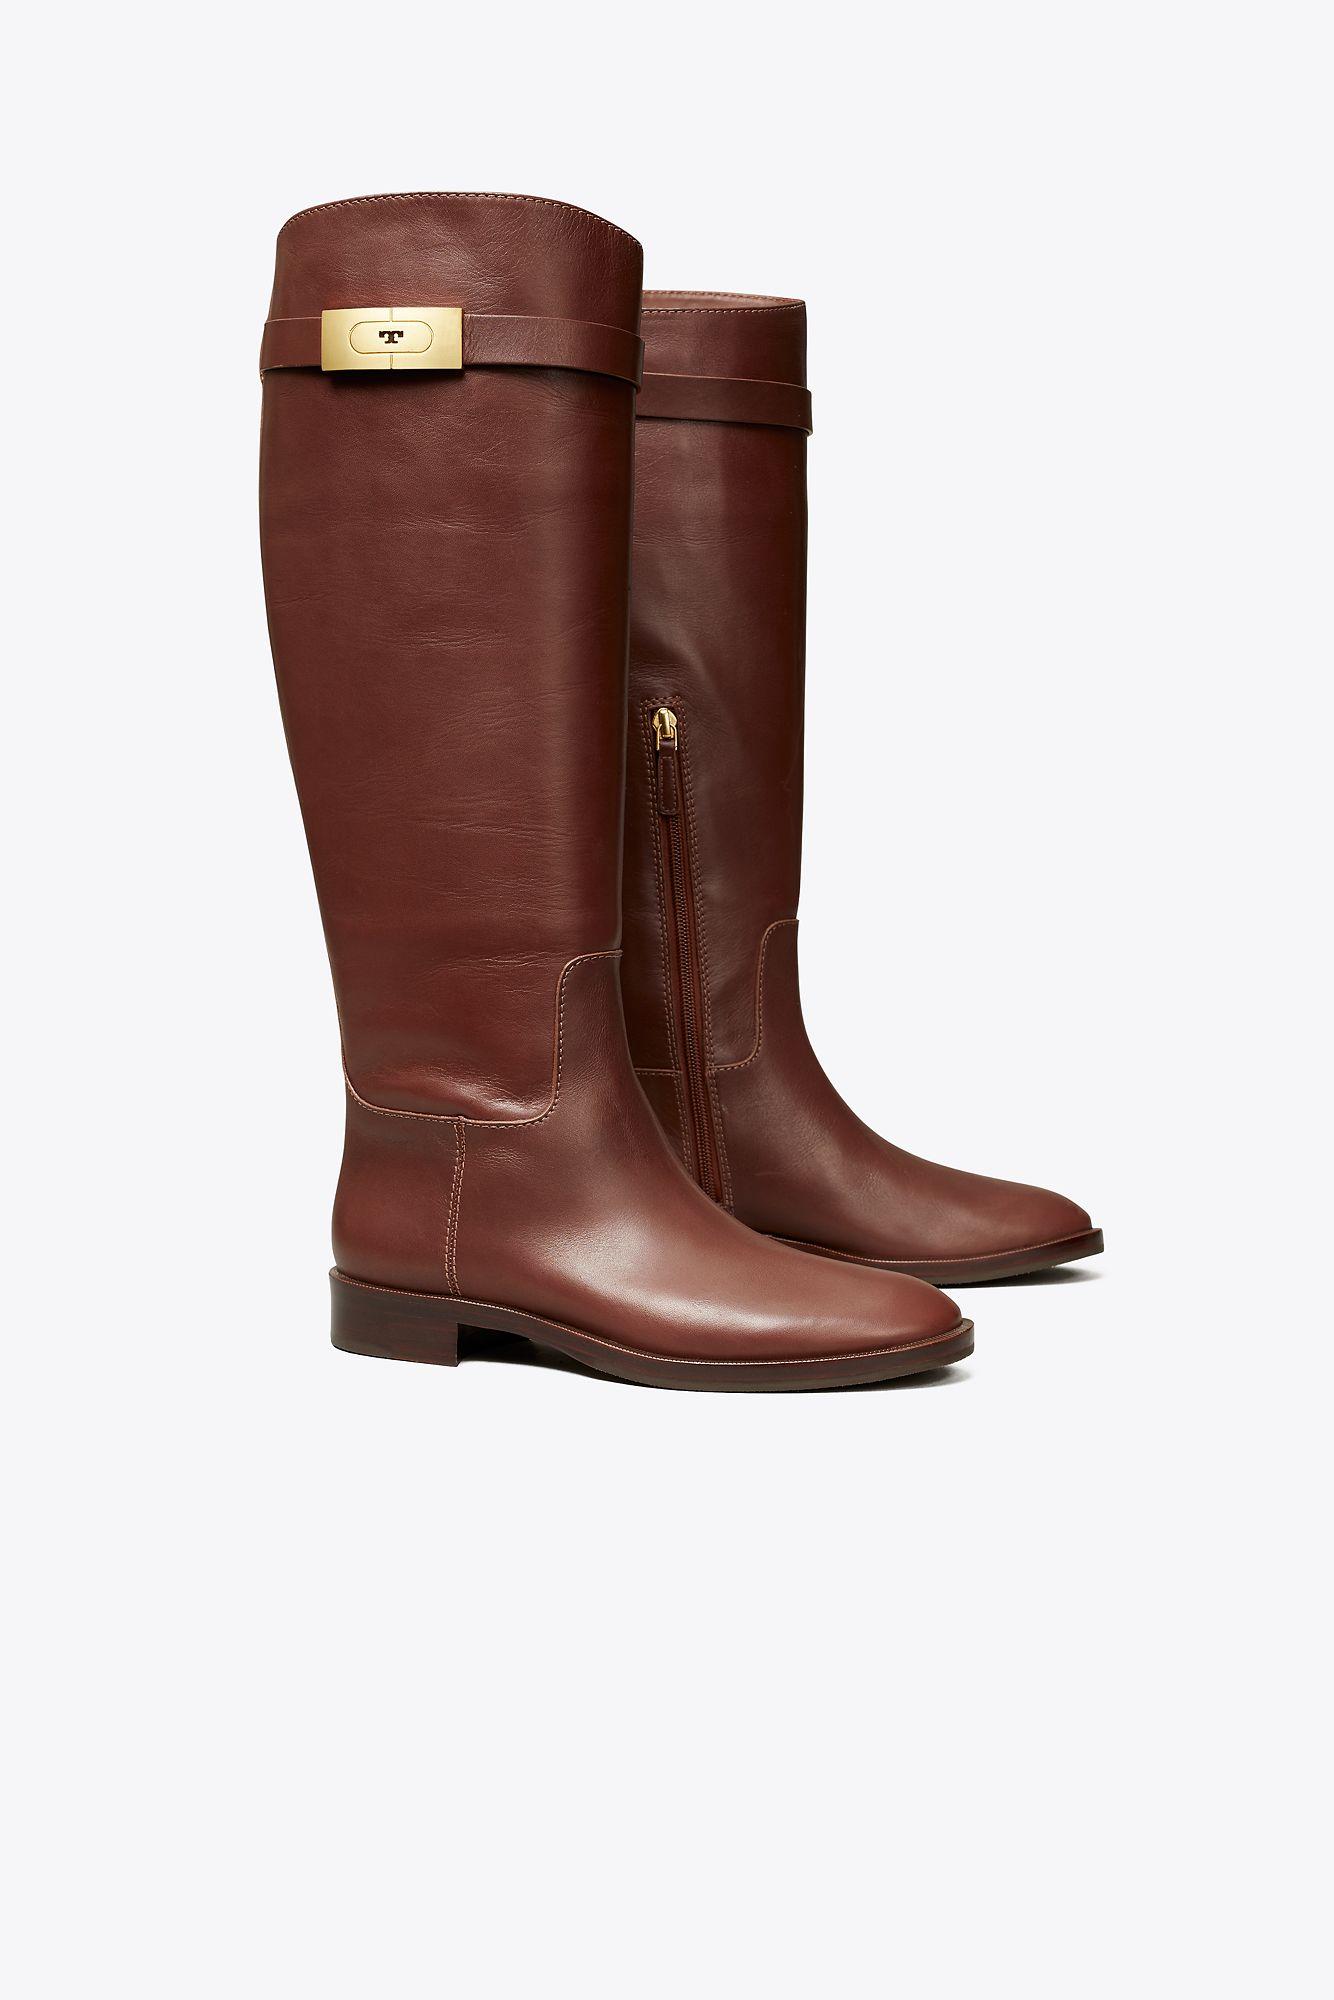 Tory Burch T-hardware Riding Boot in Brown | Lyst